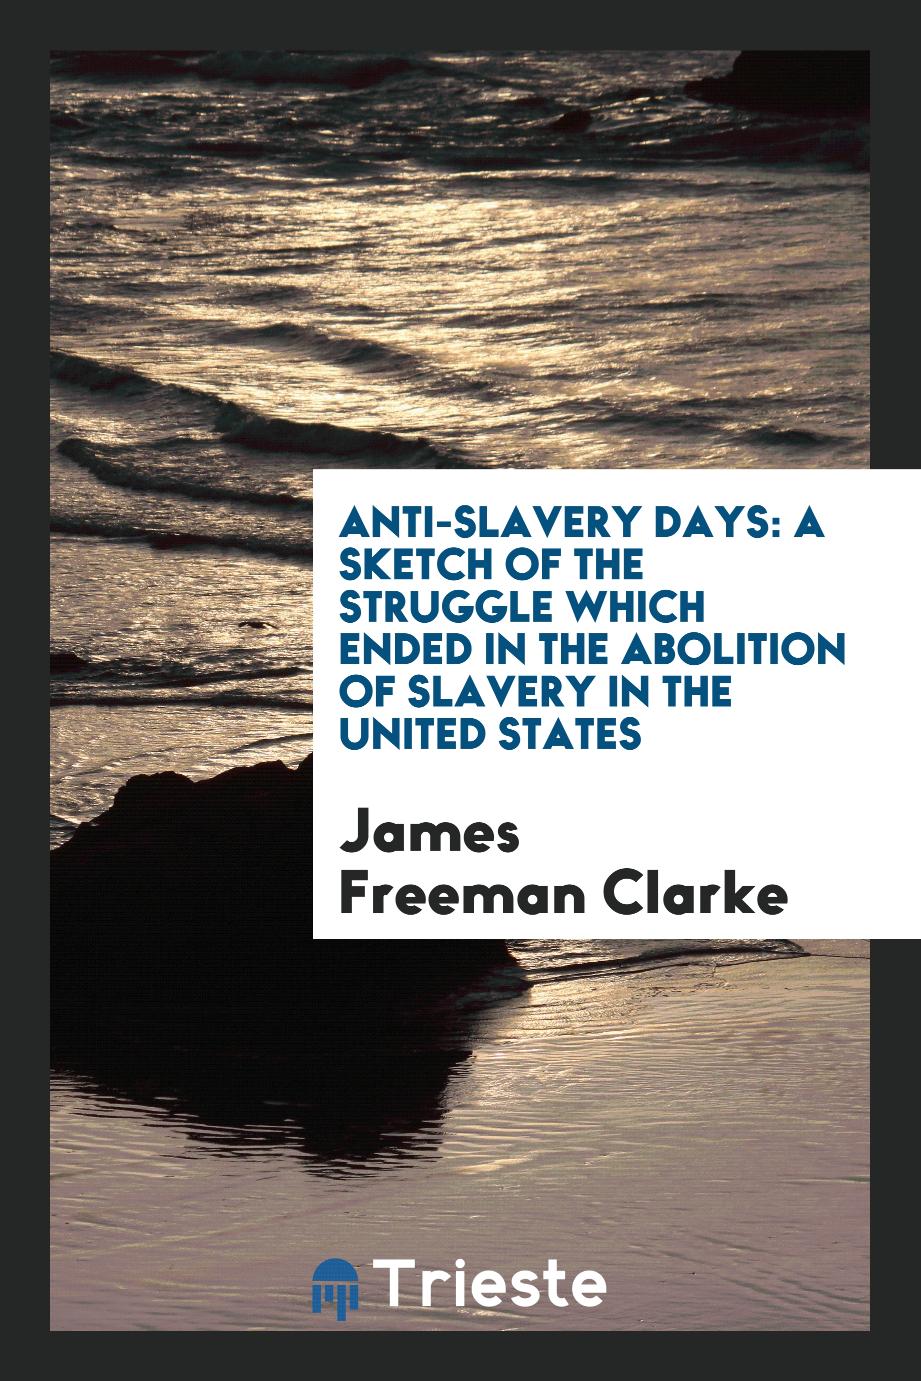 Anti-Slavery Days: A Sketch of the Struggle Which Ended in the Abolition of Slavery in the United States